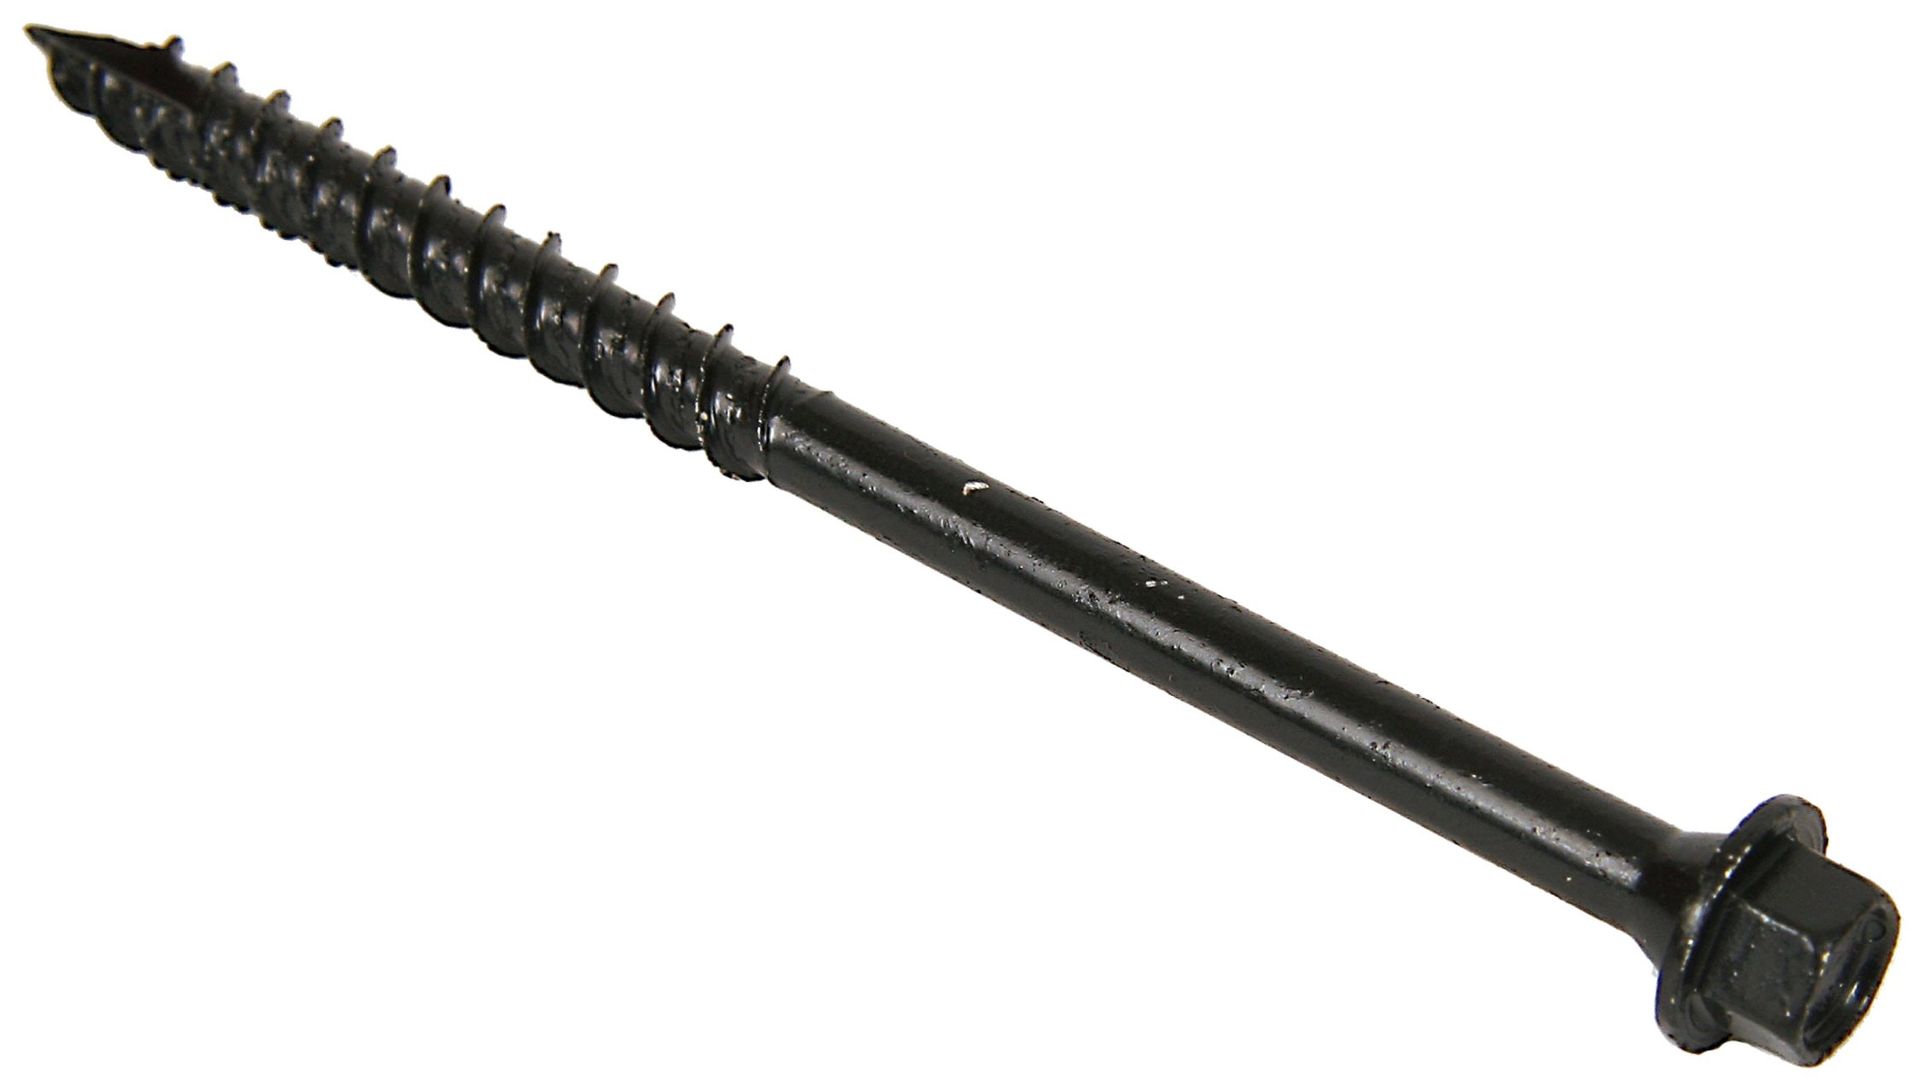 Timberfast Self Drilling Structural Timber Screw